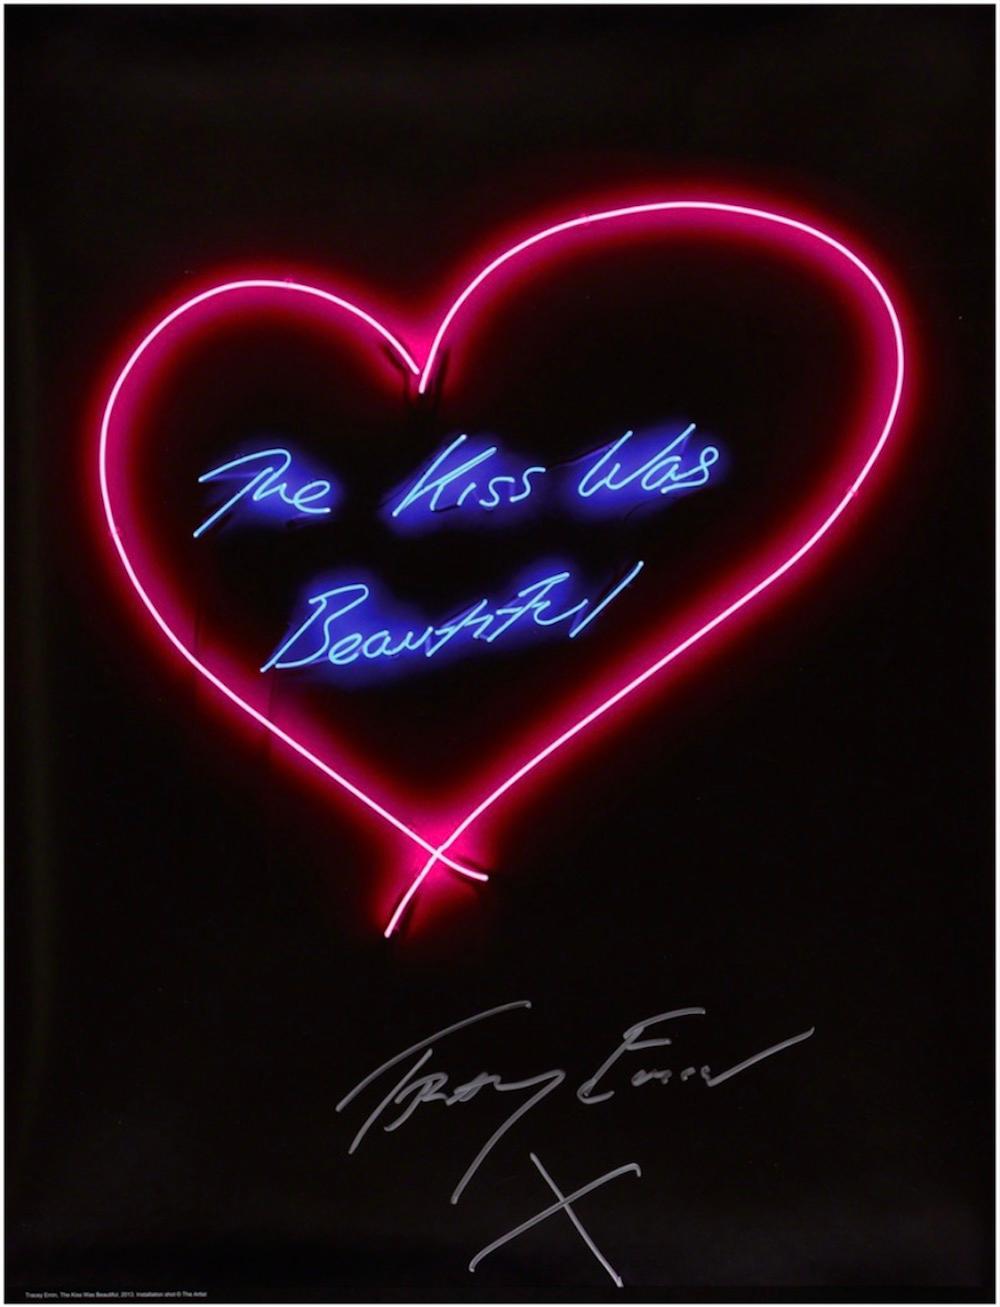 The Kiss Was Beautiful, (2013) - Mixed Media Art by Tracey Emin